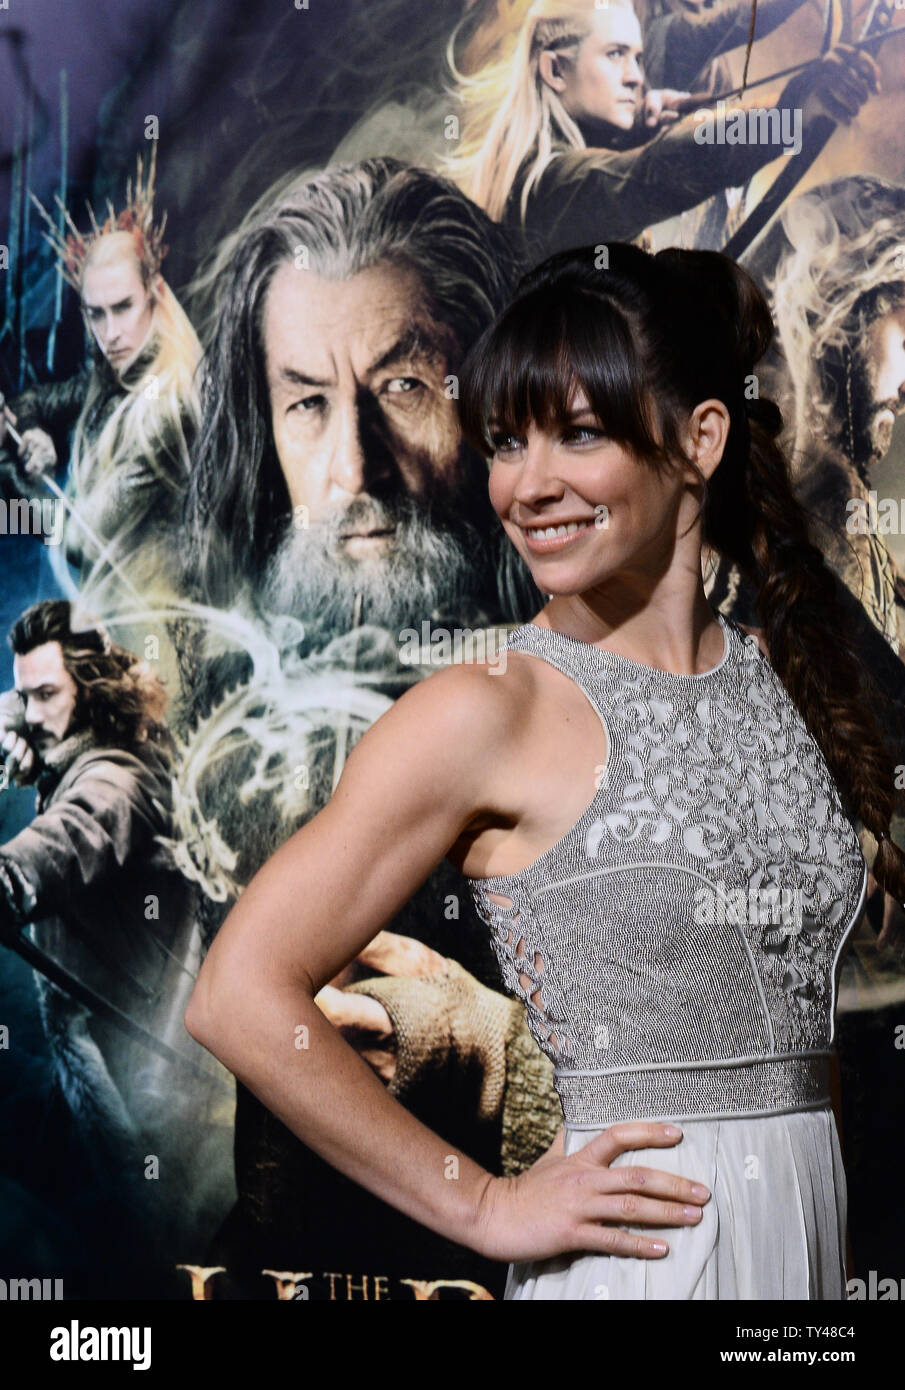 Cast member Evangeline Lilly attends the premiere of 'The Hobbit: The Desolation of Smaug' at TCL Chinese Theatre in the Hollywood section of Los Angeles on December 2, 2013. The dwarves, along with hobbit Bilbo Baggins and wizard Gandalf the Grey, continue their quest to reclaim their ancient homeland, Erebor, from Smaug.  Bilbo Baggins posseses a powerful and magical ring.  The movie is another 'Hobbit' story in the tradition of the 'Lord of the Rings' trilogy from novelist J.R.R. Tolkien.  UPI/Jim Ruymen Stock Photo